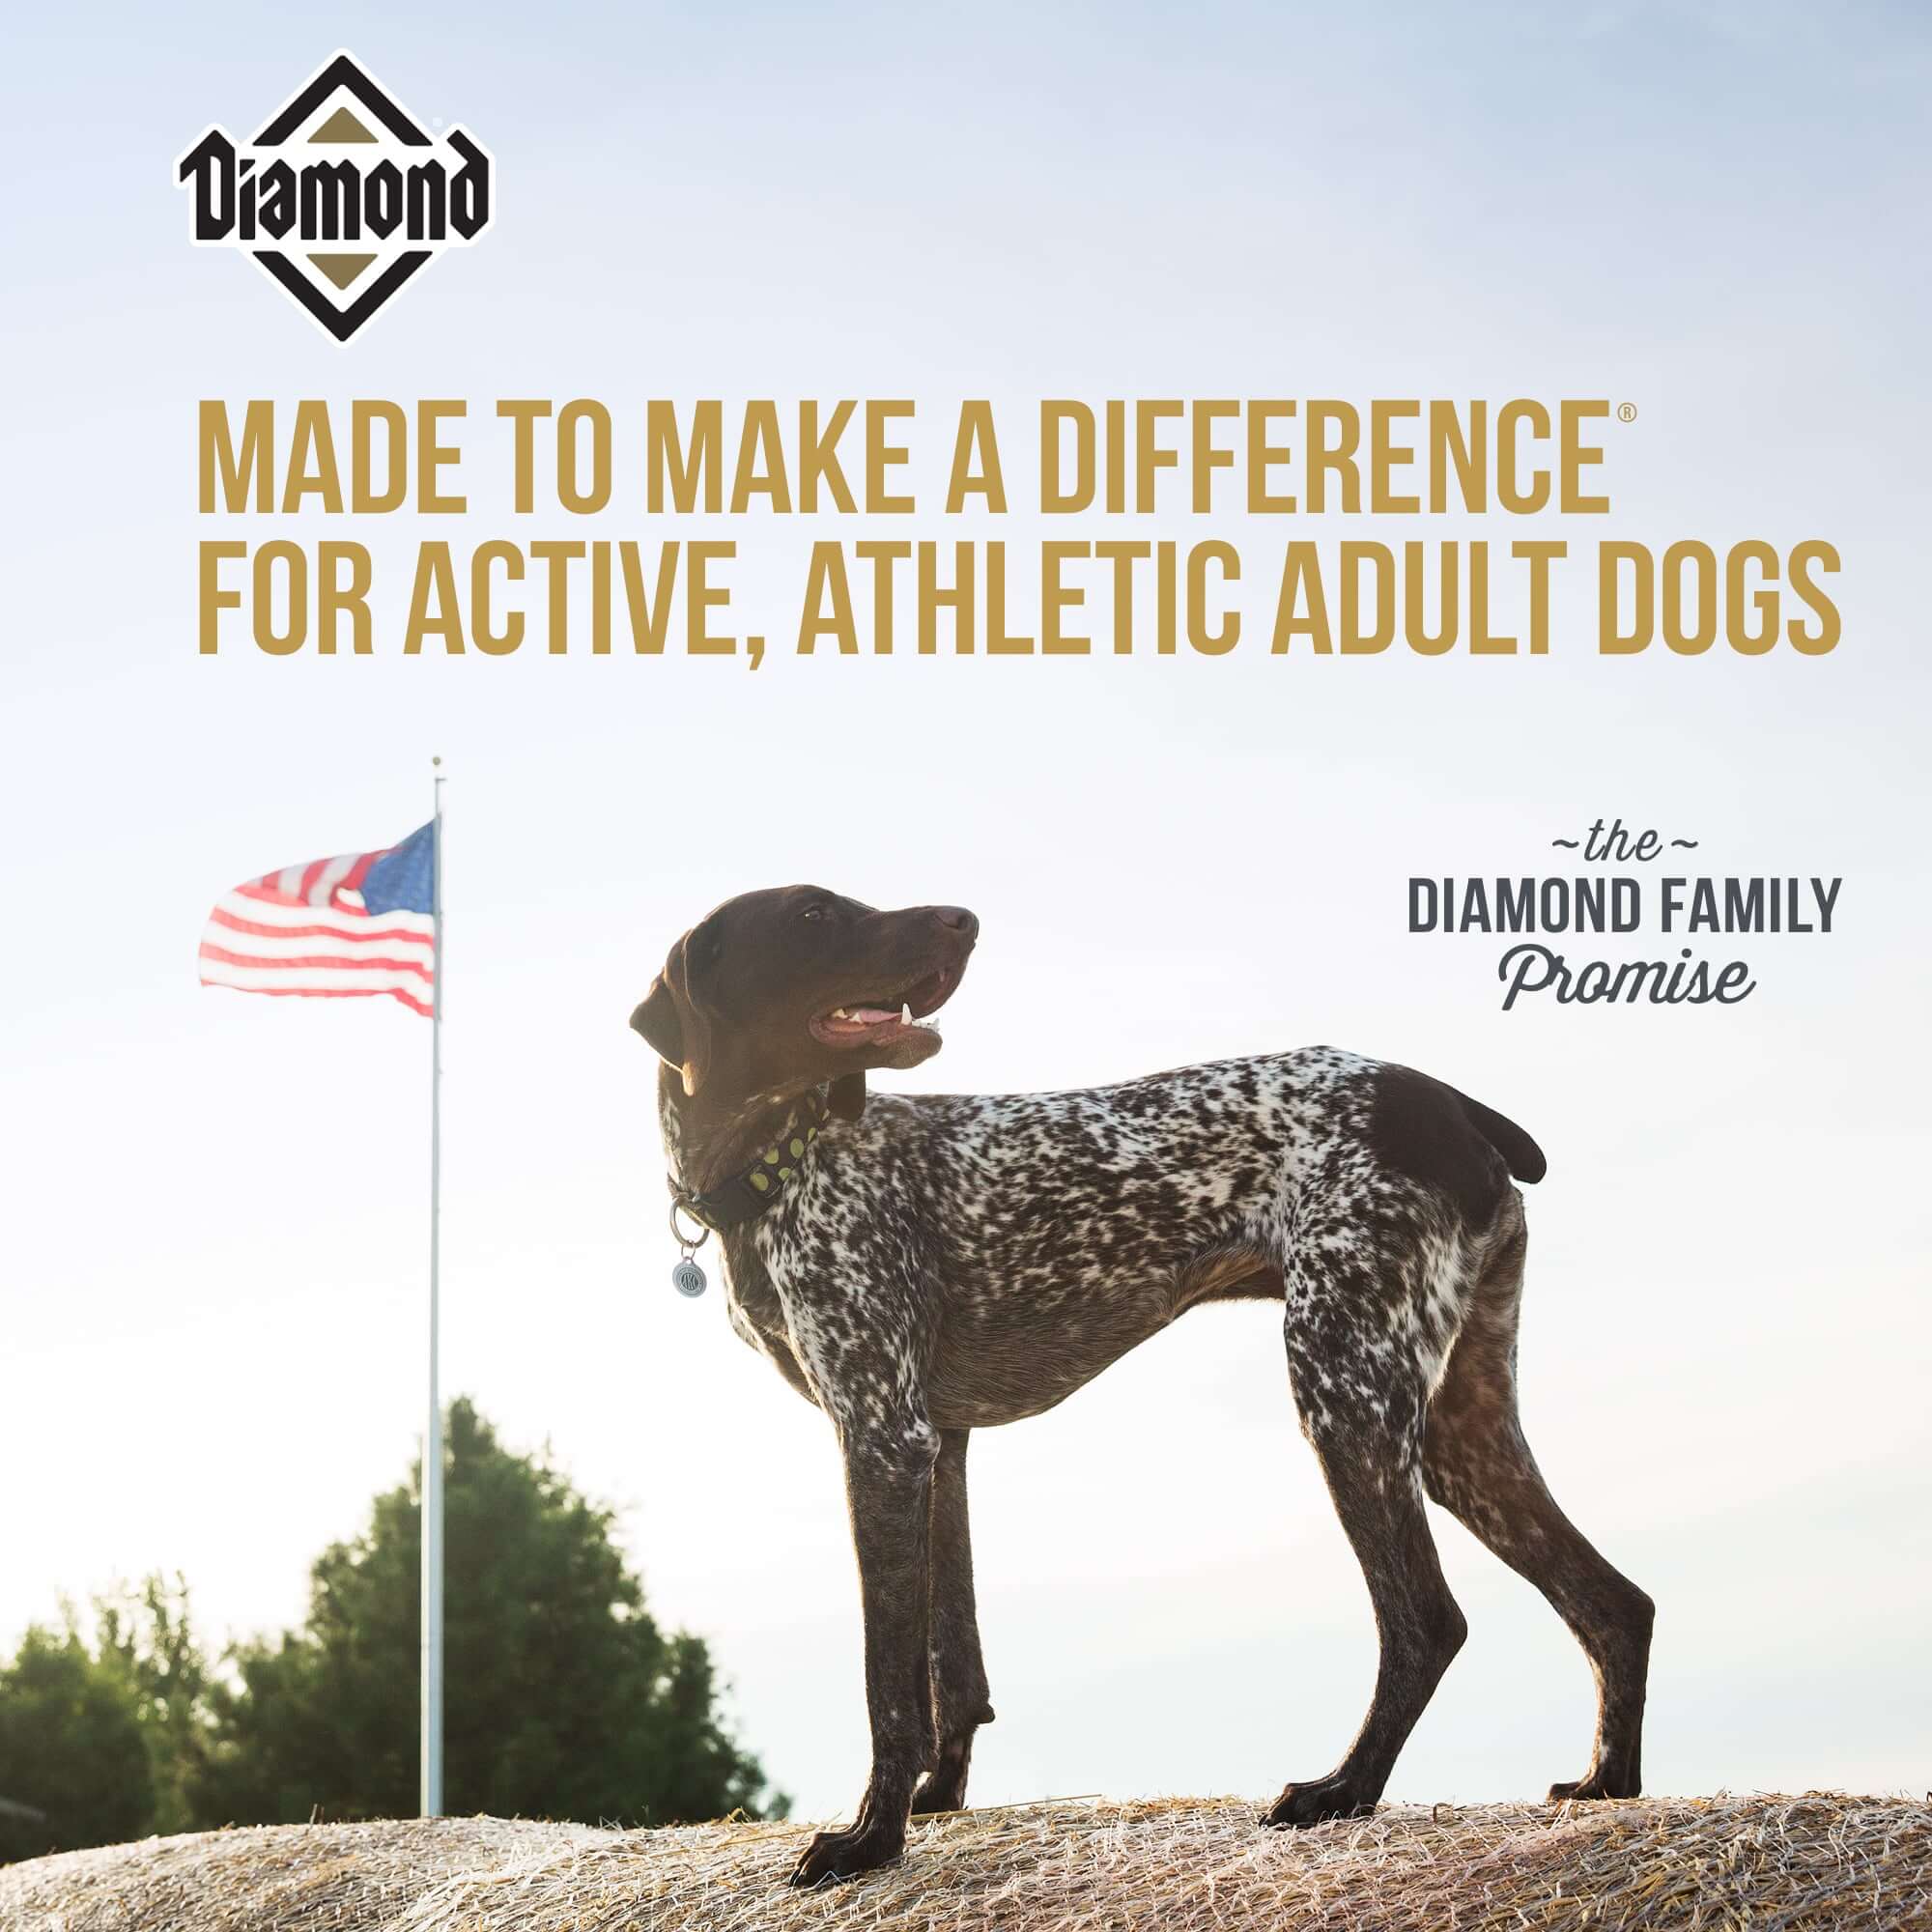 Diamond Made to make a difference for active, athletic adult dogs